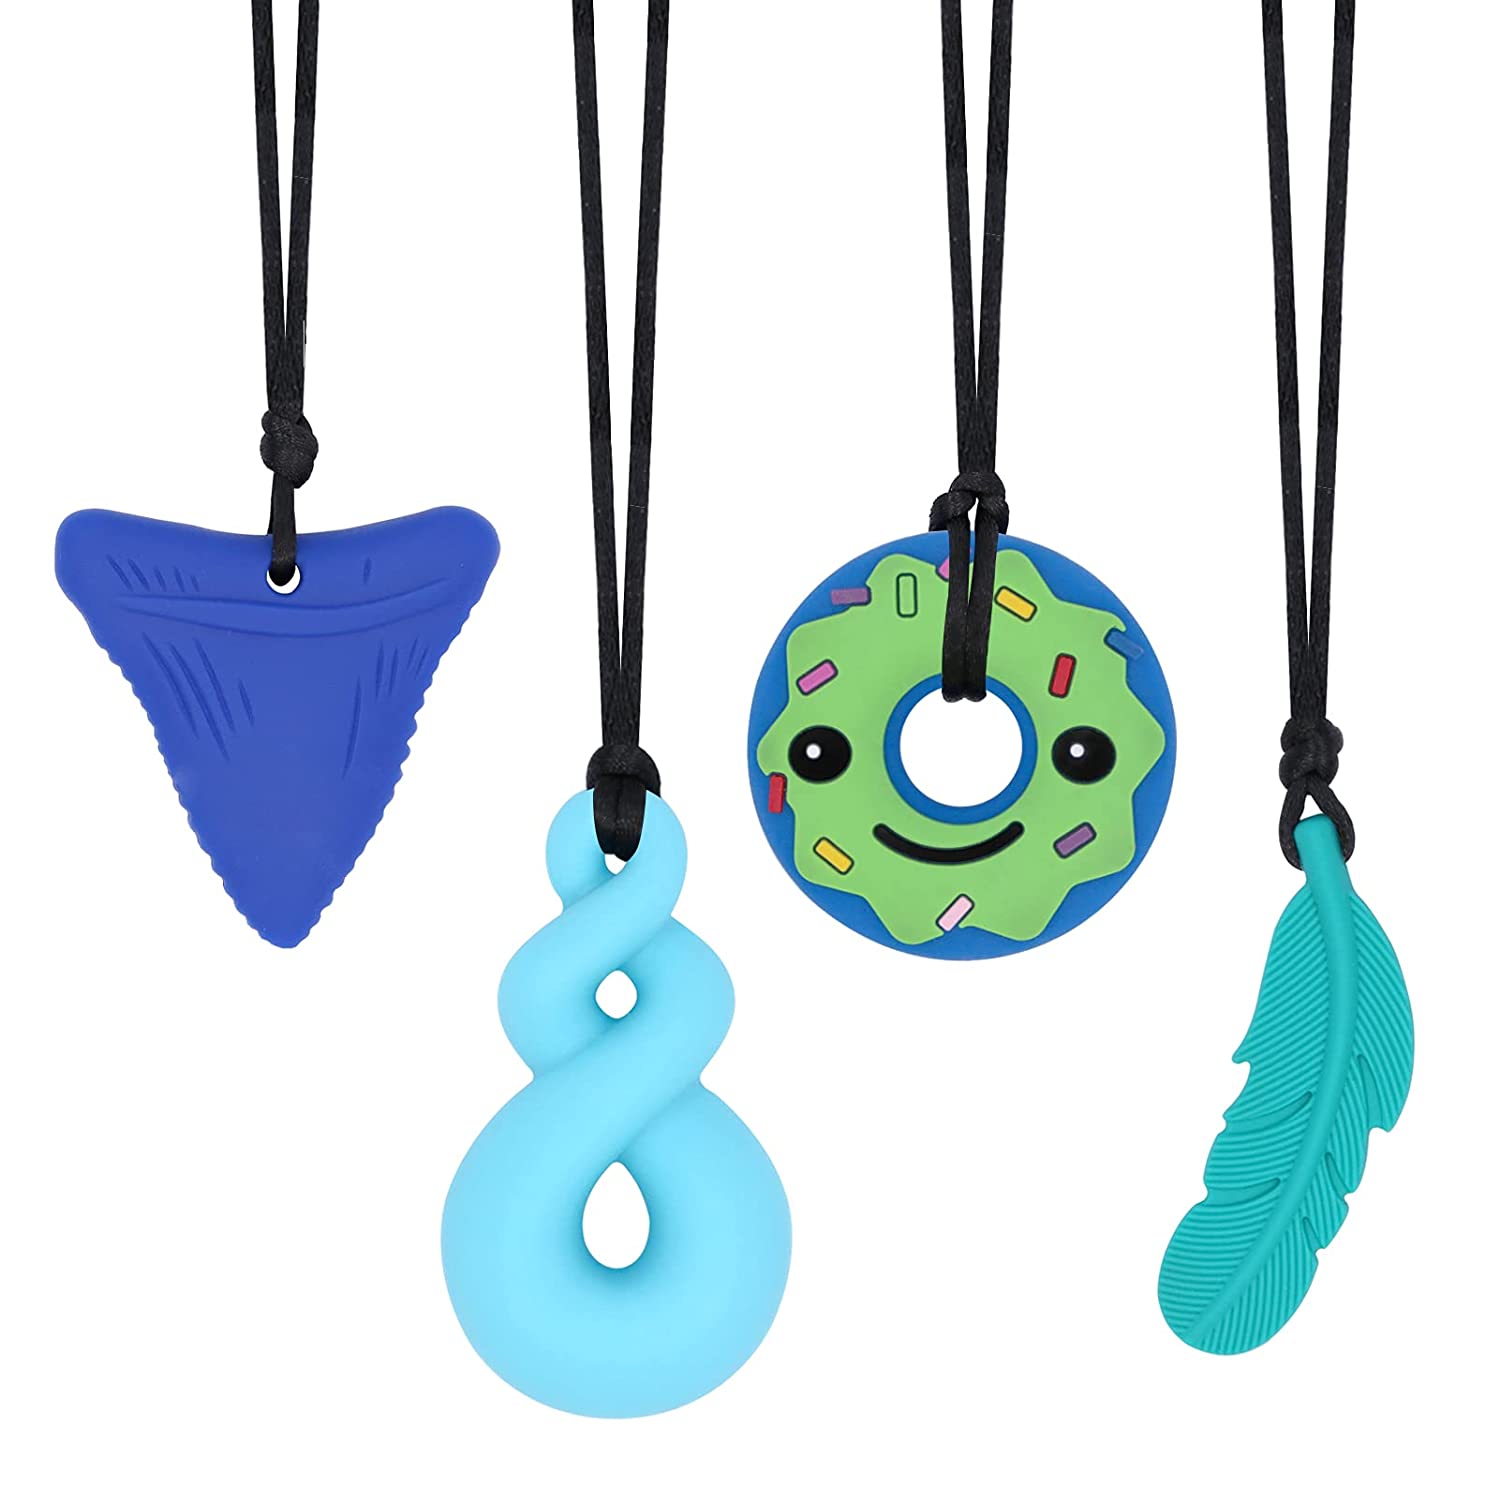 Buy El Regalo 1 PC Sensory Chew Necklace for Kids Adults- Silicone Anxiety  Chewable Necklace for Autism ADHD SPD PICA and Oral Motor Chewing Needs  (Donut Teether) Online at Low Prices in